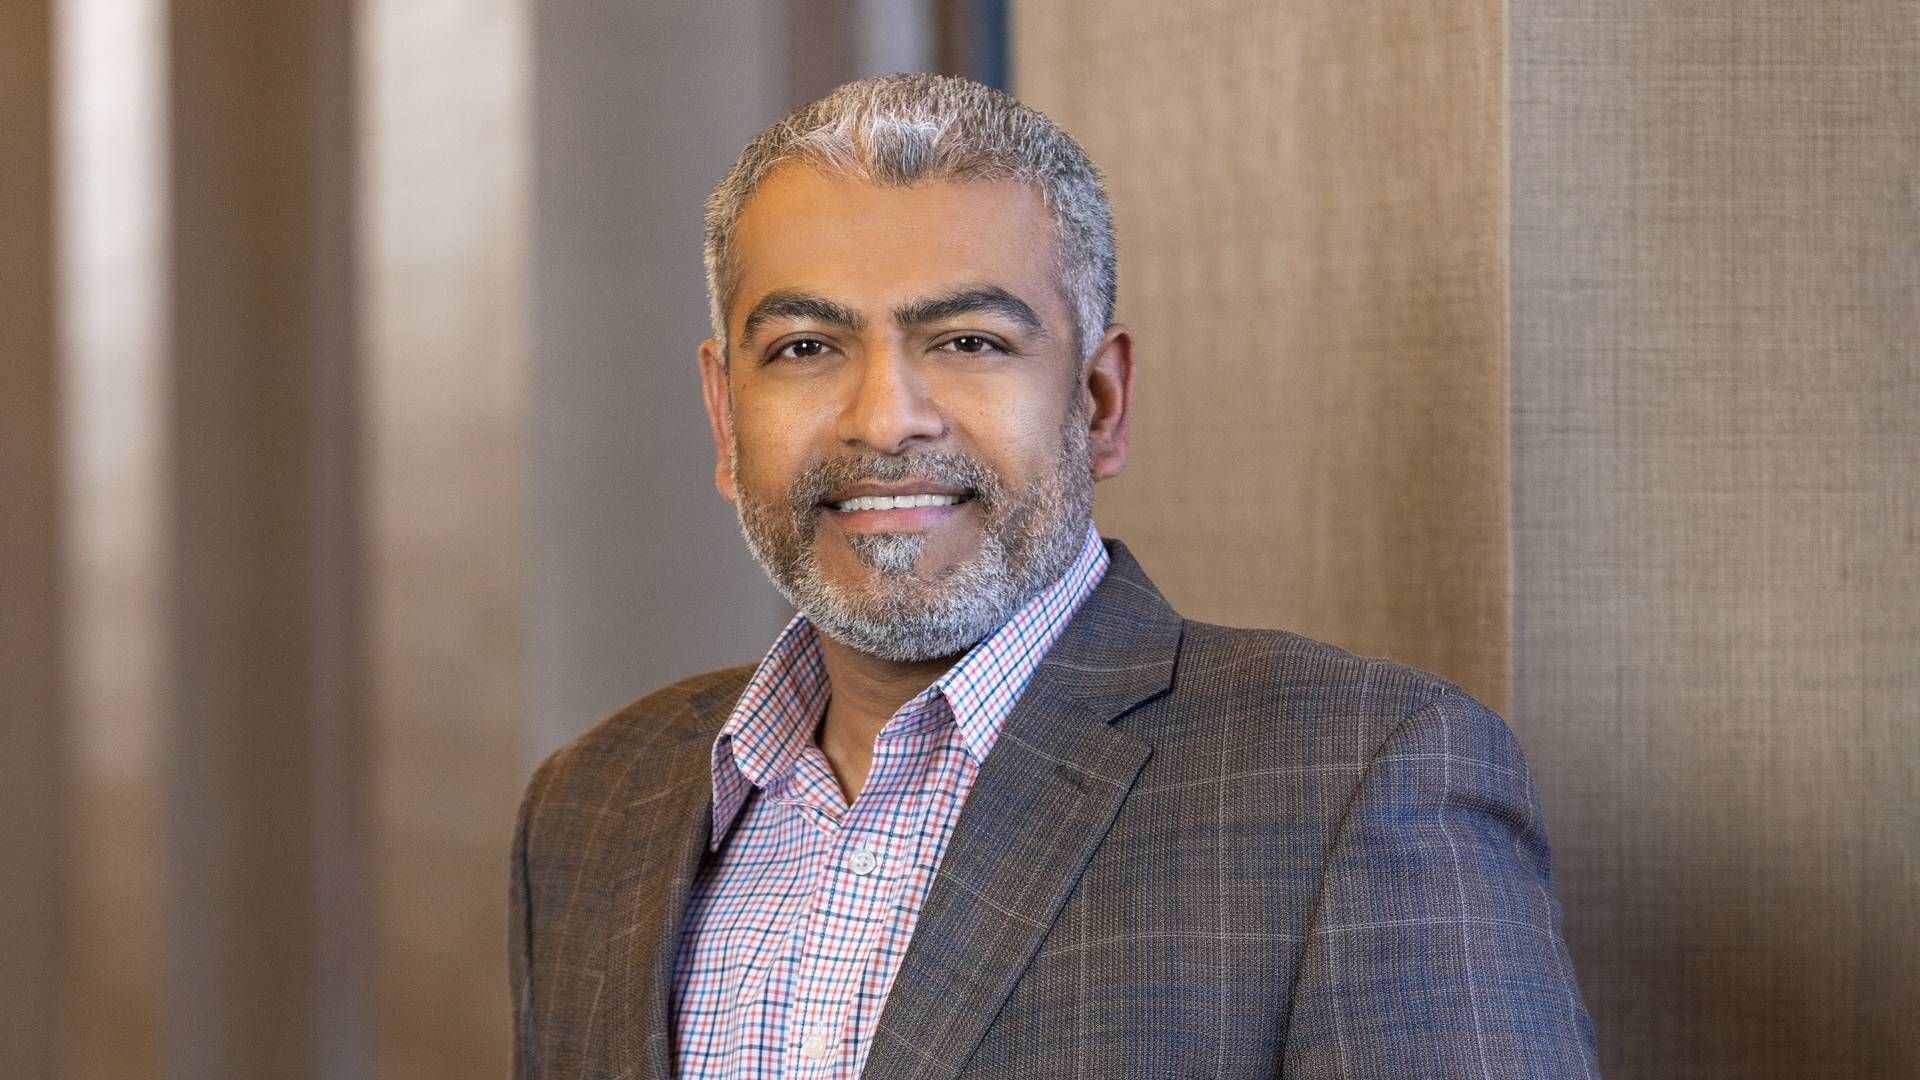 Sri Laxmana, vice president of US logistics company C.H. Robinson, is preparing for more companies to look for new ways to avoid supply chain turmoil. | Photo: C.h. Robinson / Pr